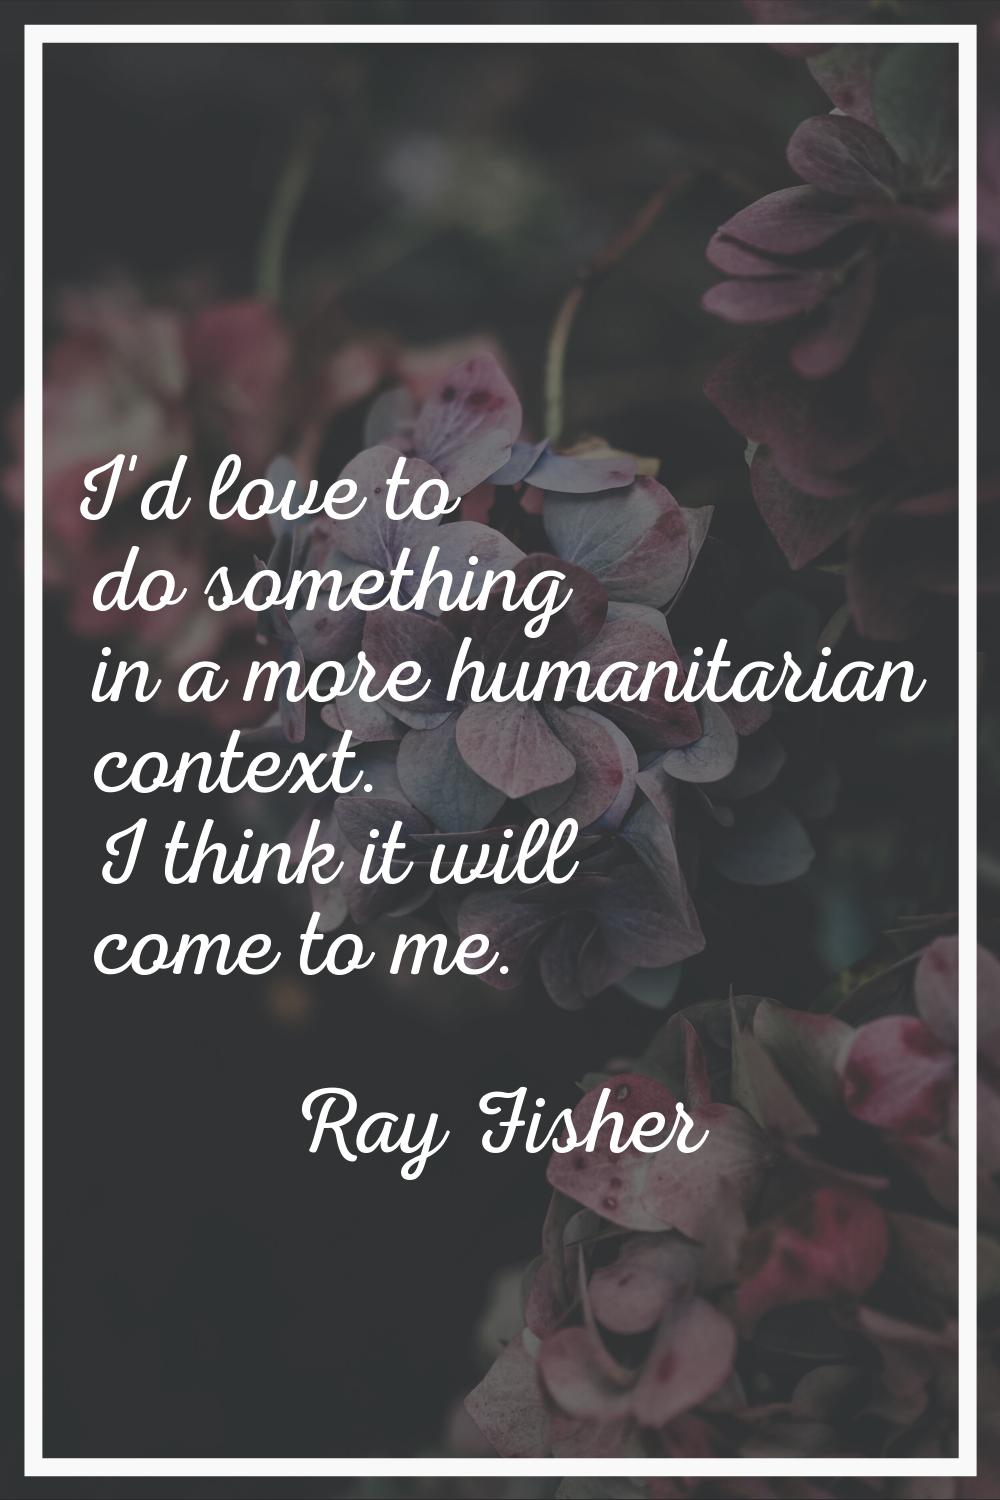 I'd love to do something in a more humanitarian context. I think it will come to me.